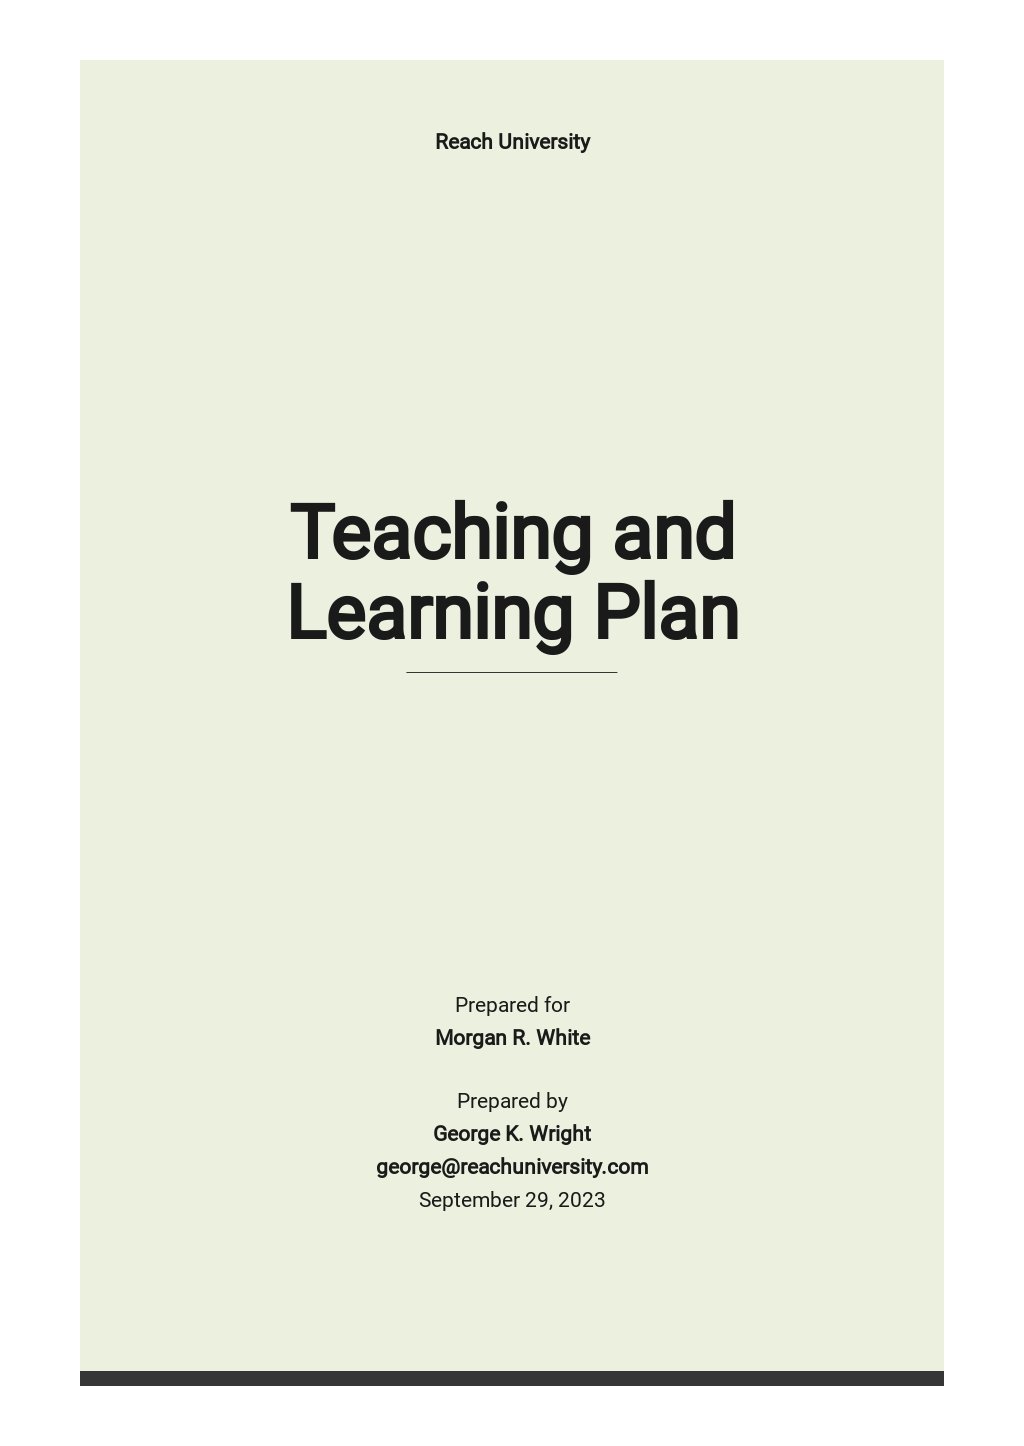 Teaching and Learning Plan Template.jpe